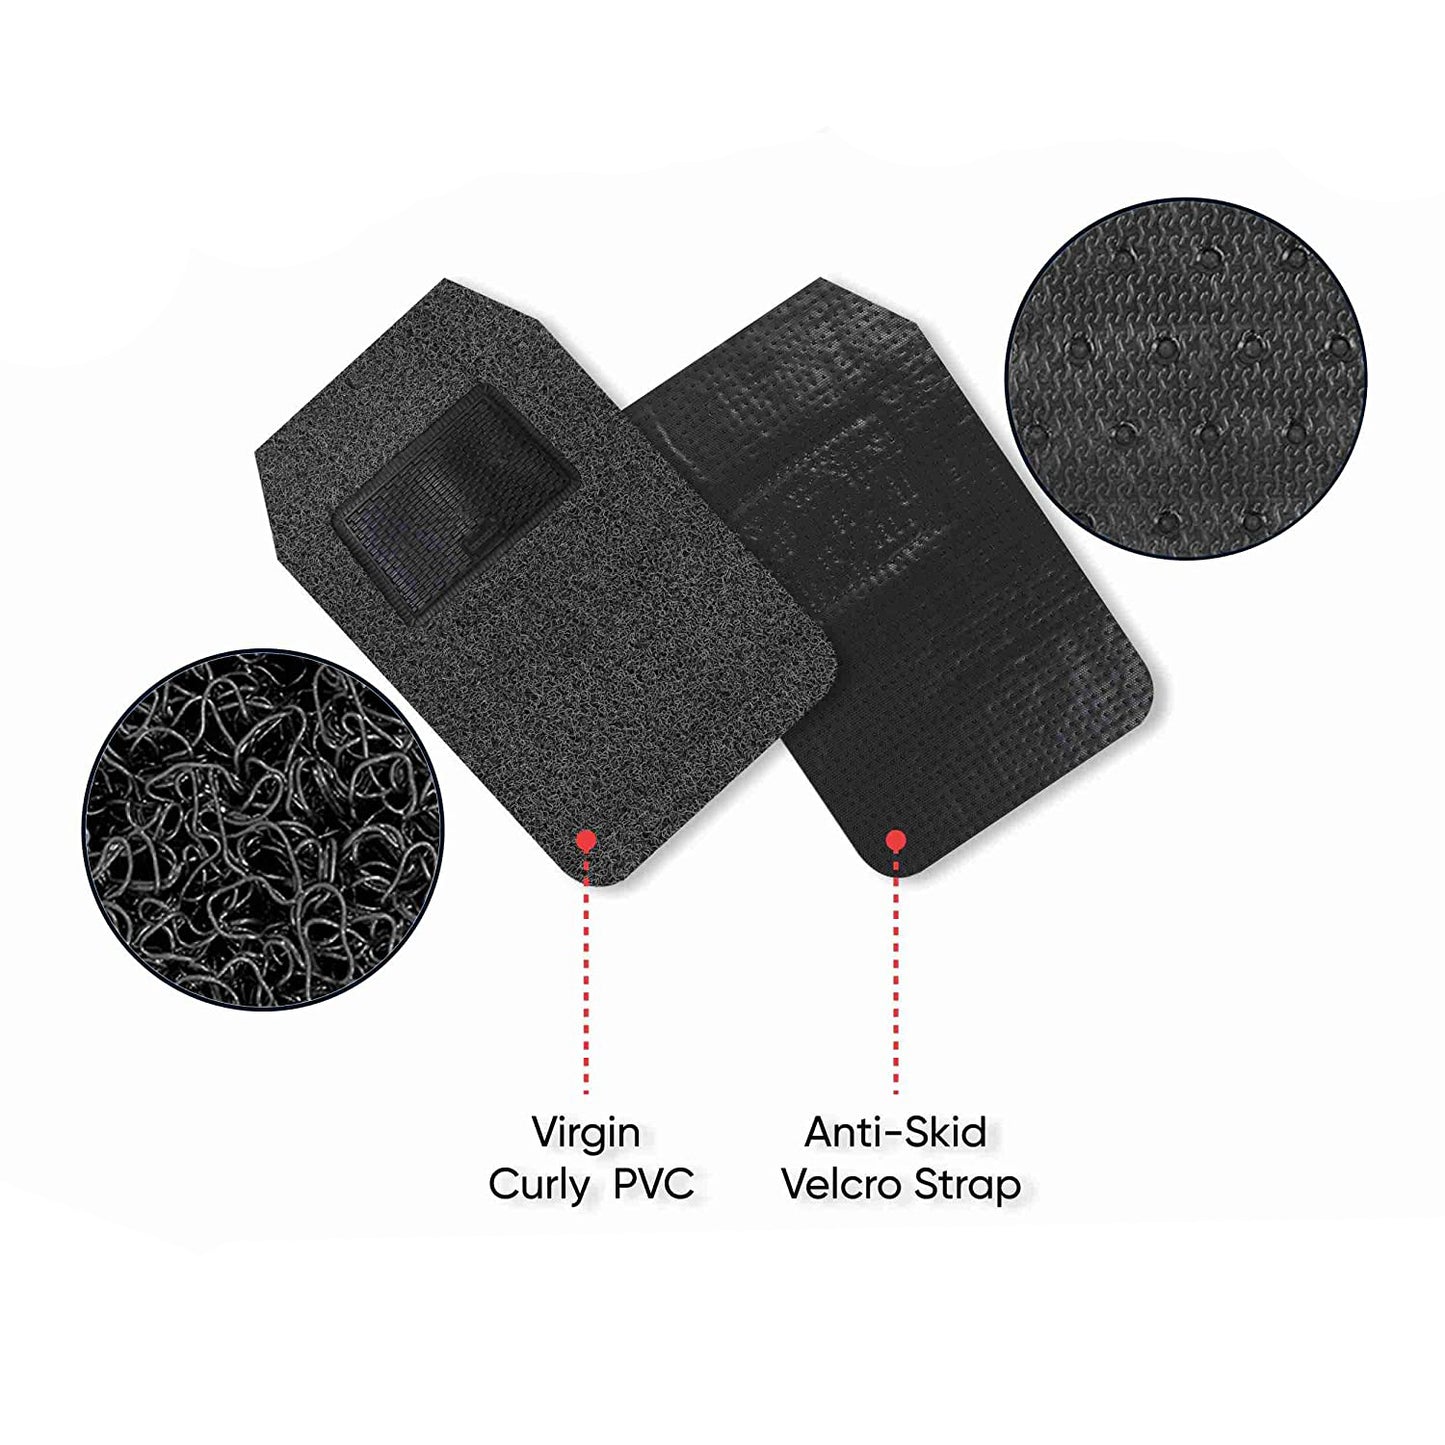 Oshotto Anti Skid Curly Noodle Grass 18mm Car Foot/Floor Mats for All Cars (Set of 5, Black)